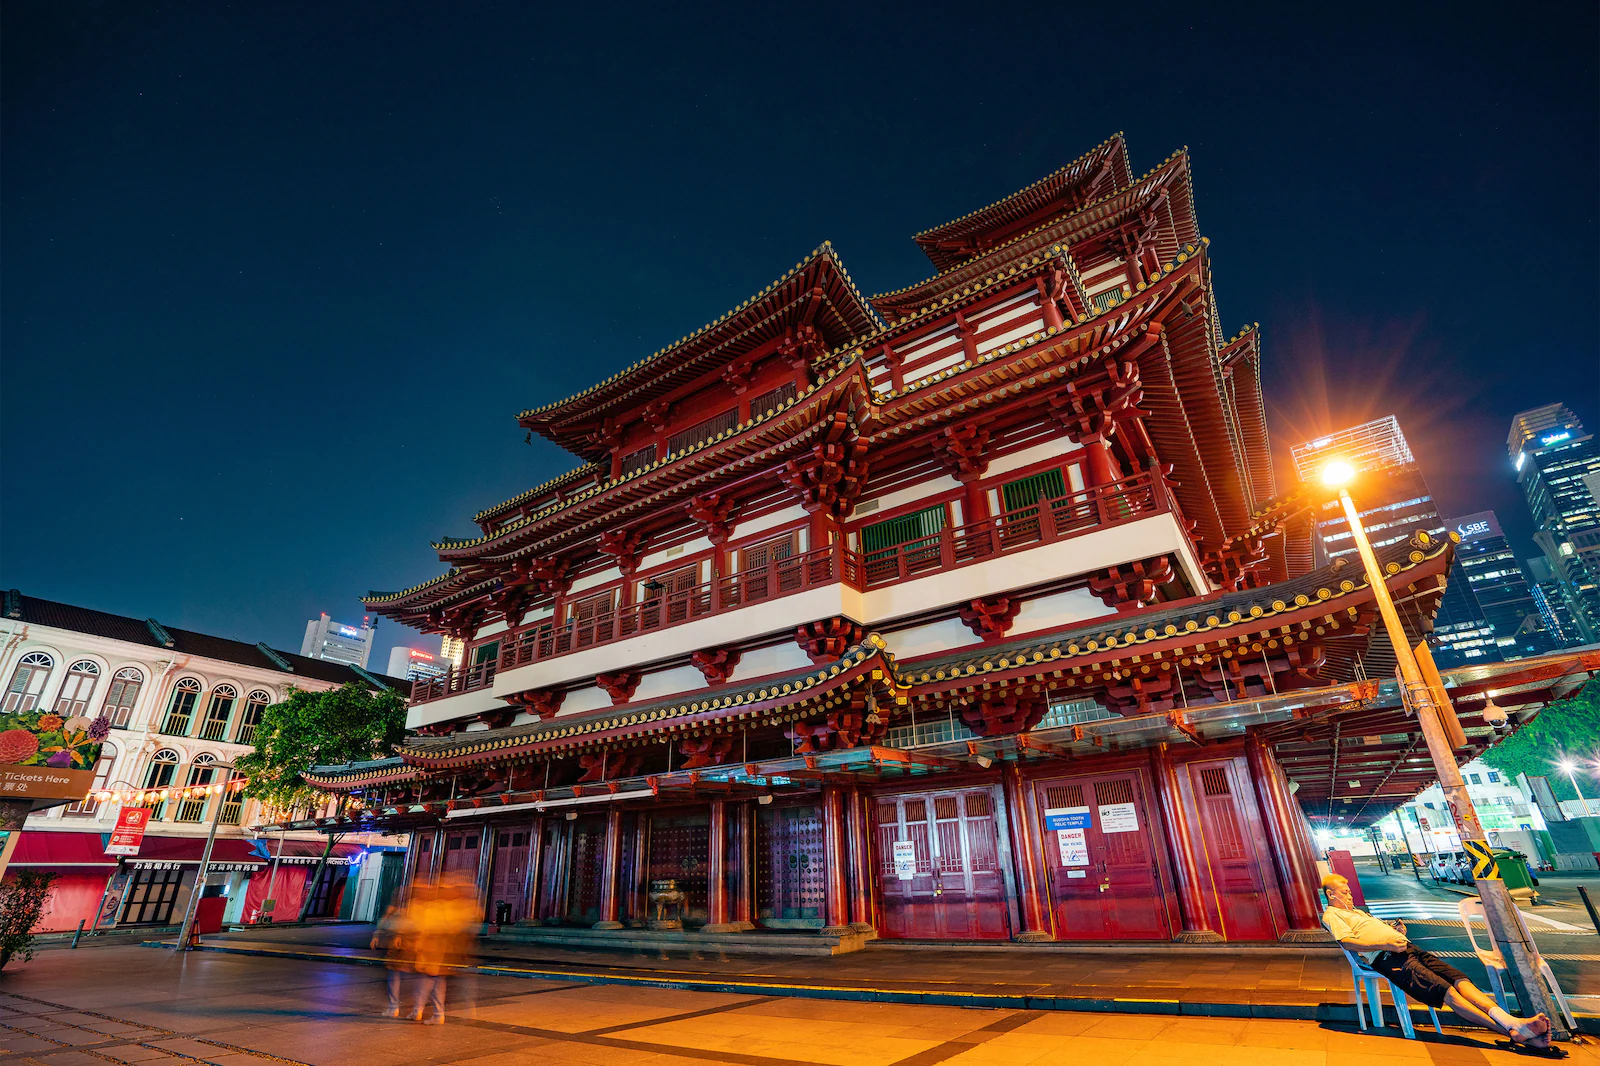 Buddha Relic Tooth temple in Singapore